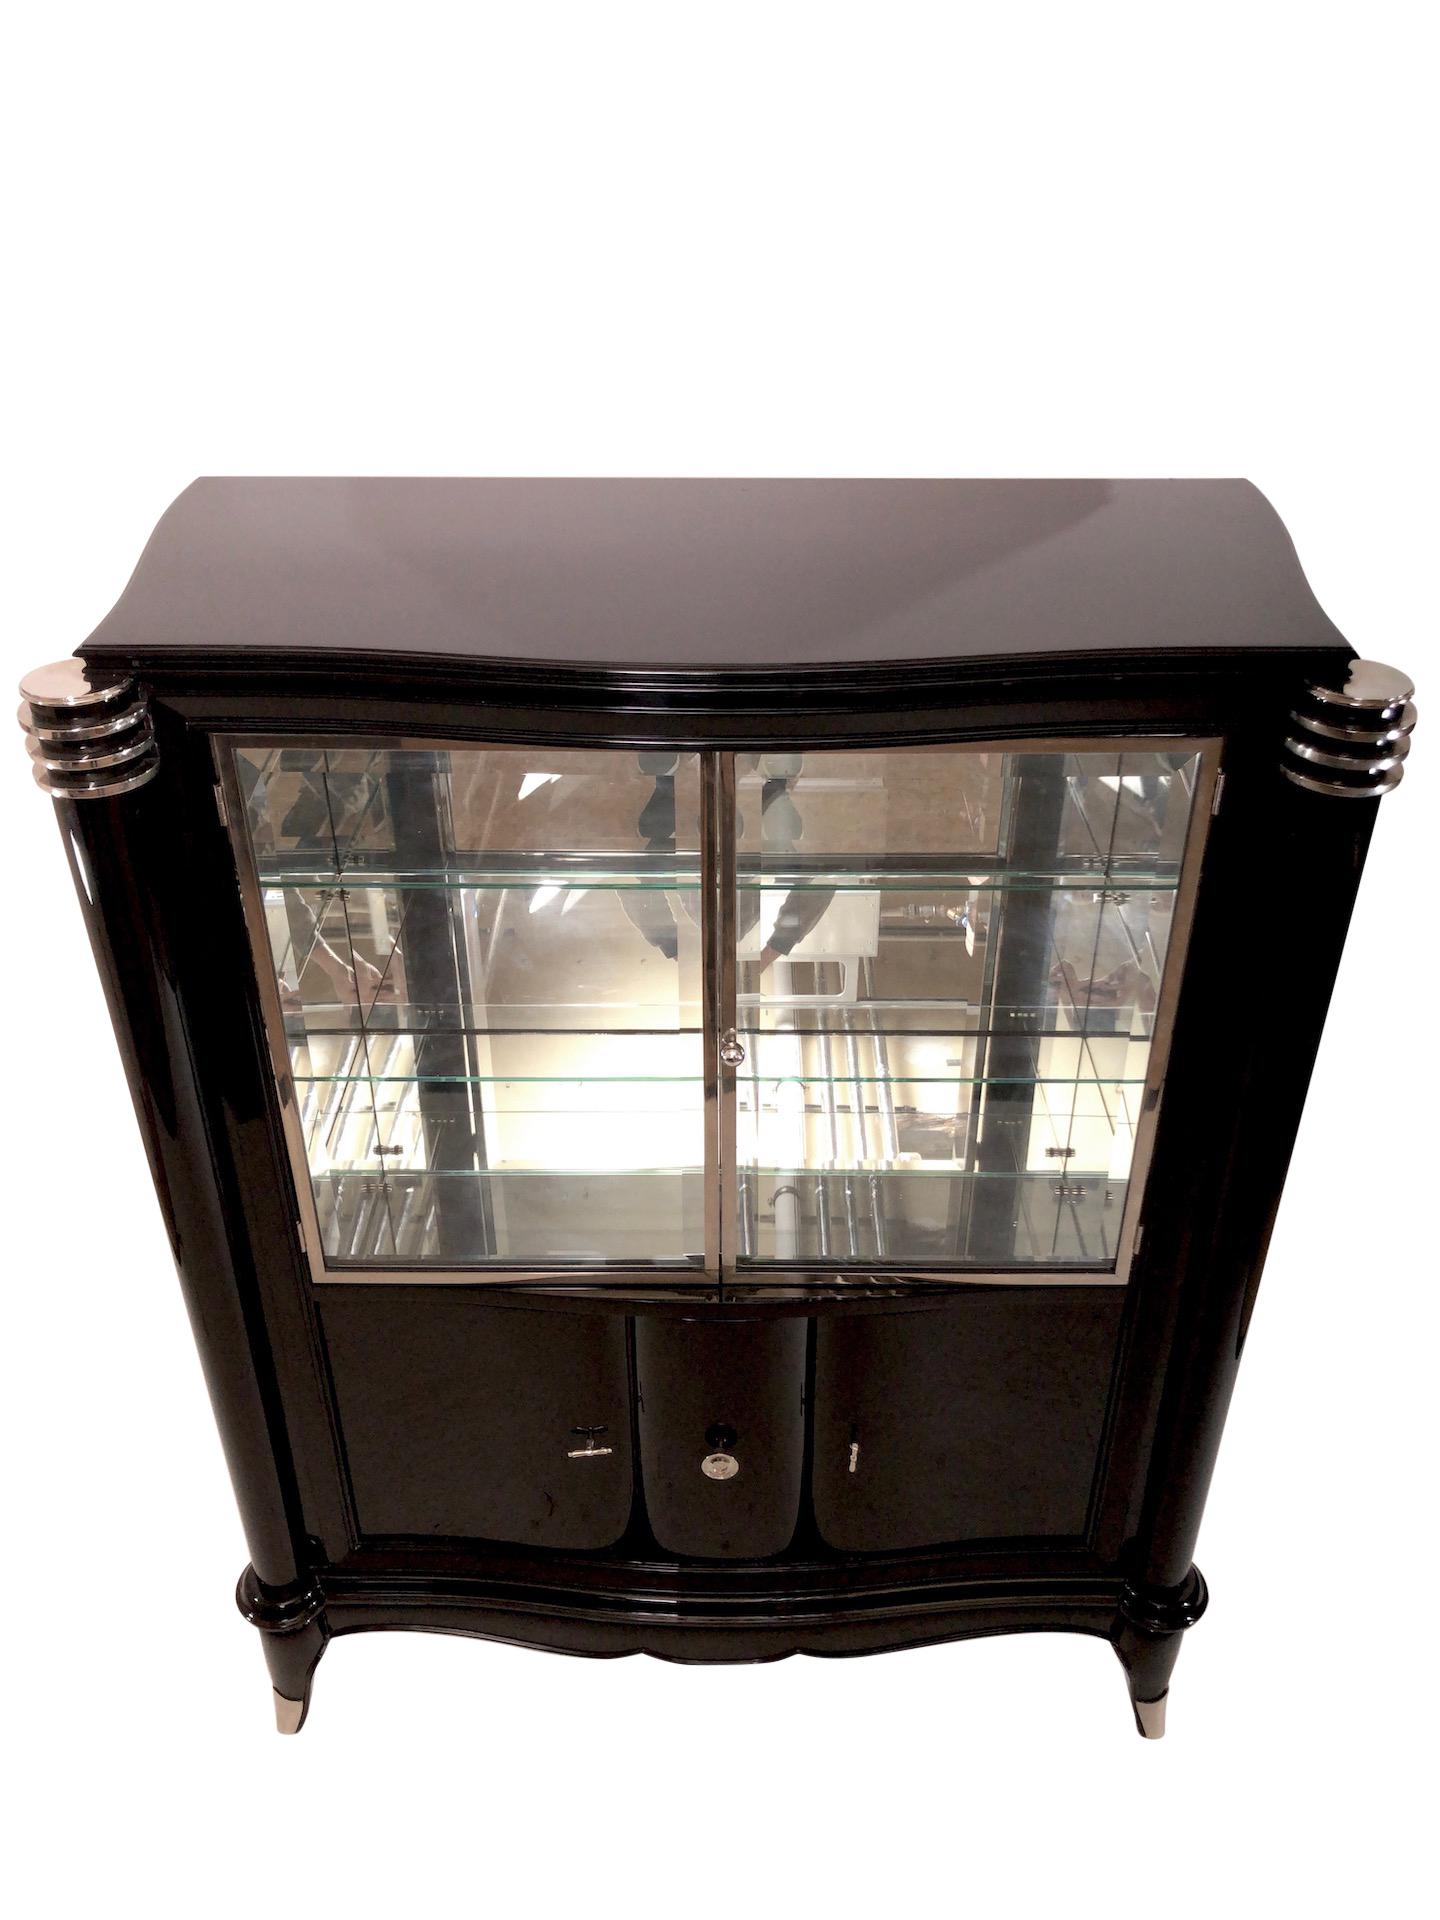 Metal 1930s Black Piano Lacquer Vitrine with Dry Bar Original French Art Deco For Sale